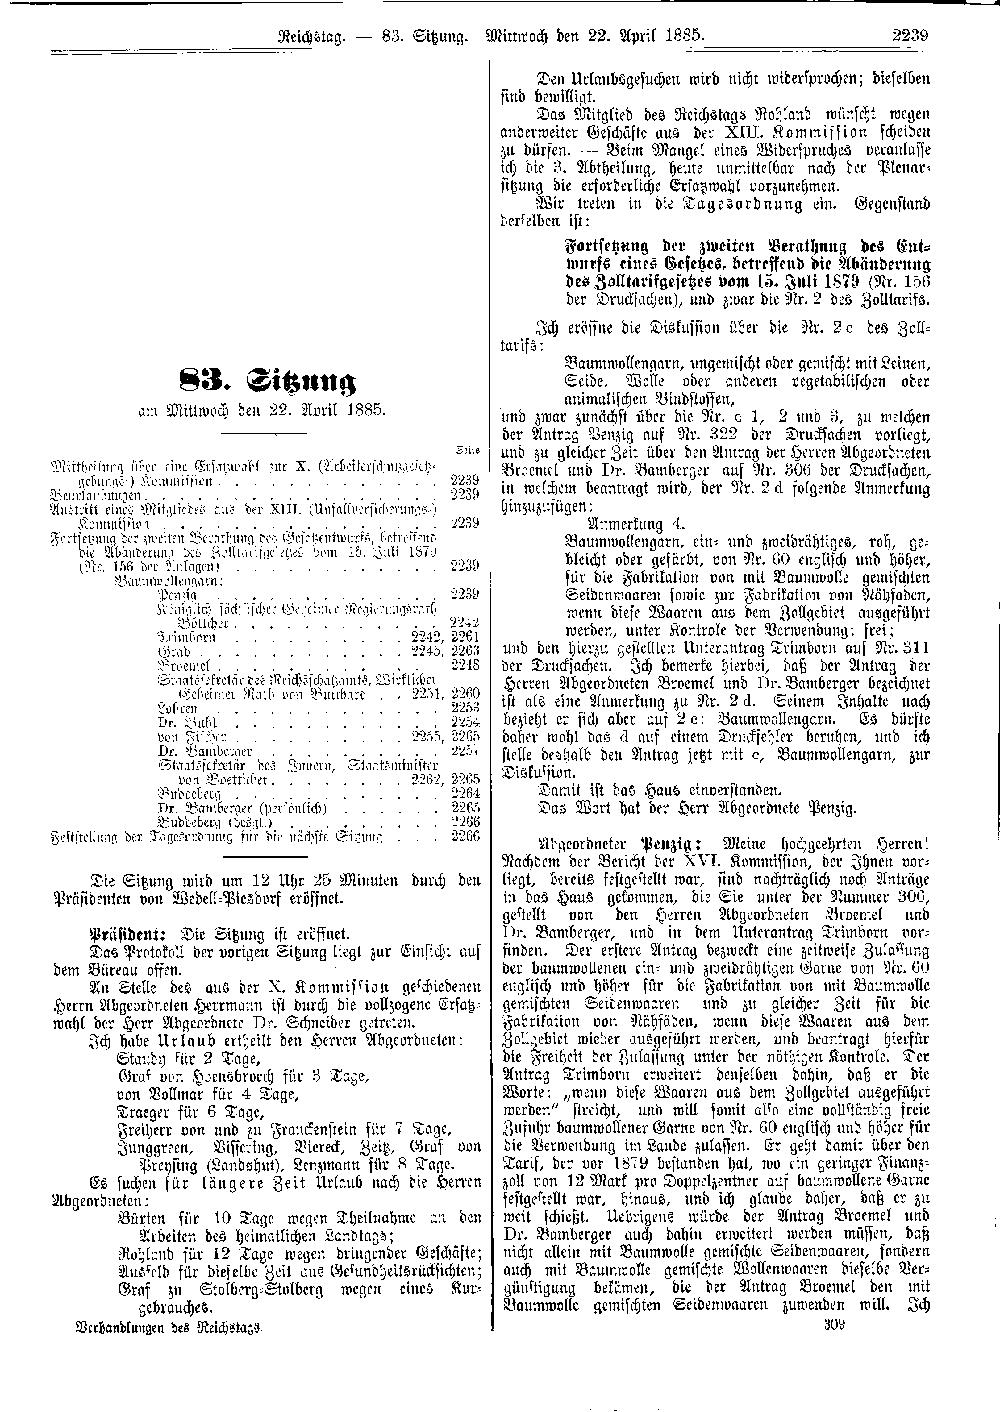 Scan of page 2239